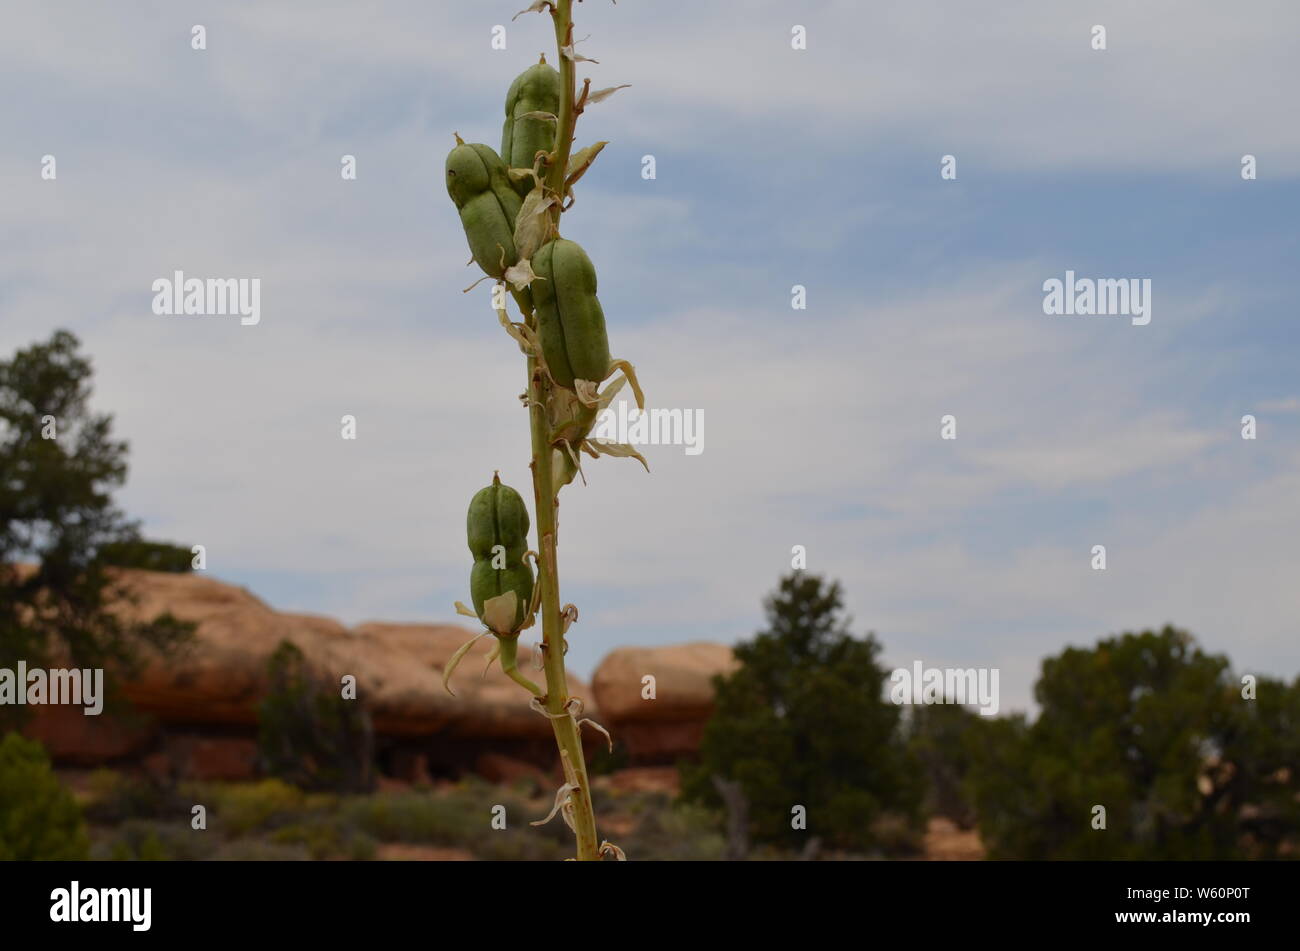 Summer in Southern Utah: Yucca Seed Pods Stock Photo